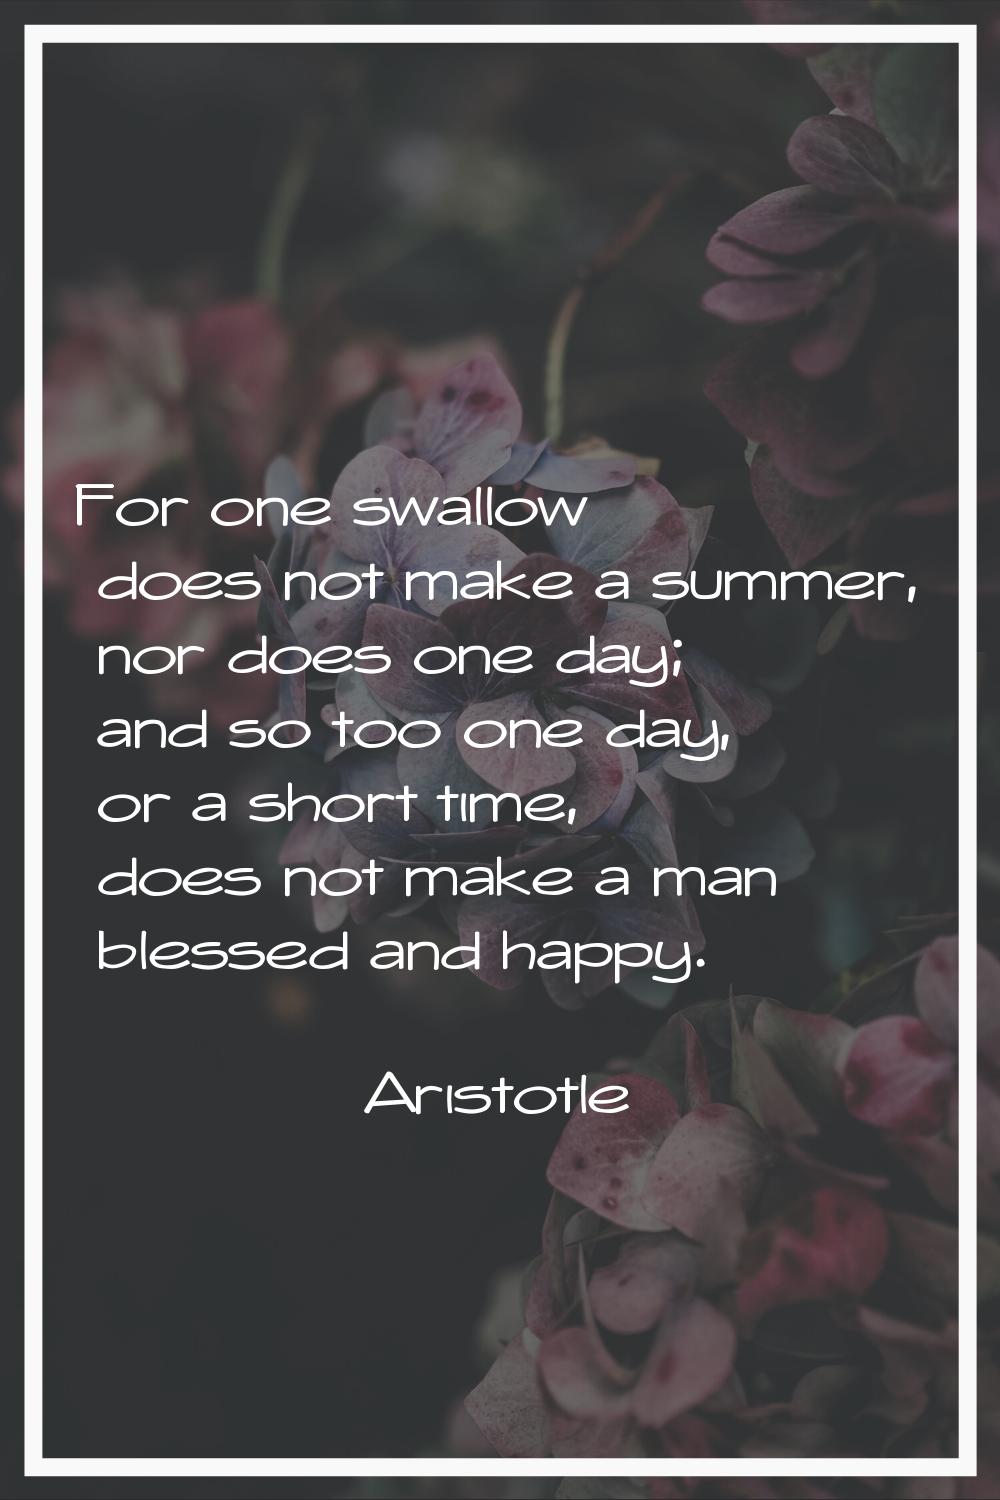 For one swallow does not make a summer, nor does one day; and so too one day, or a short time, does